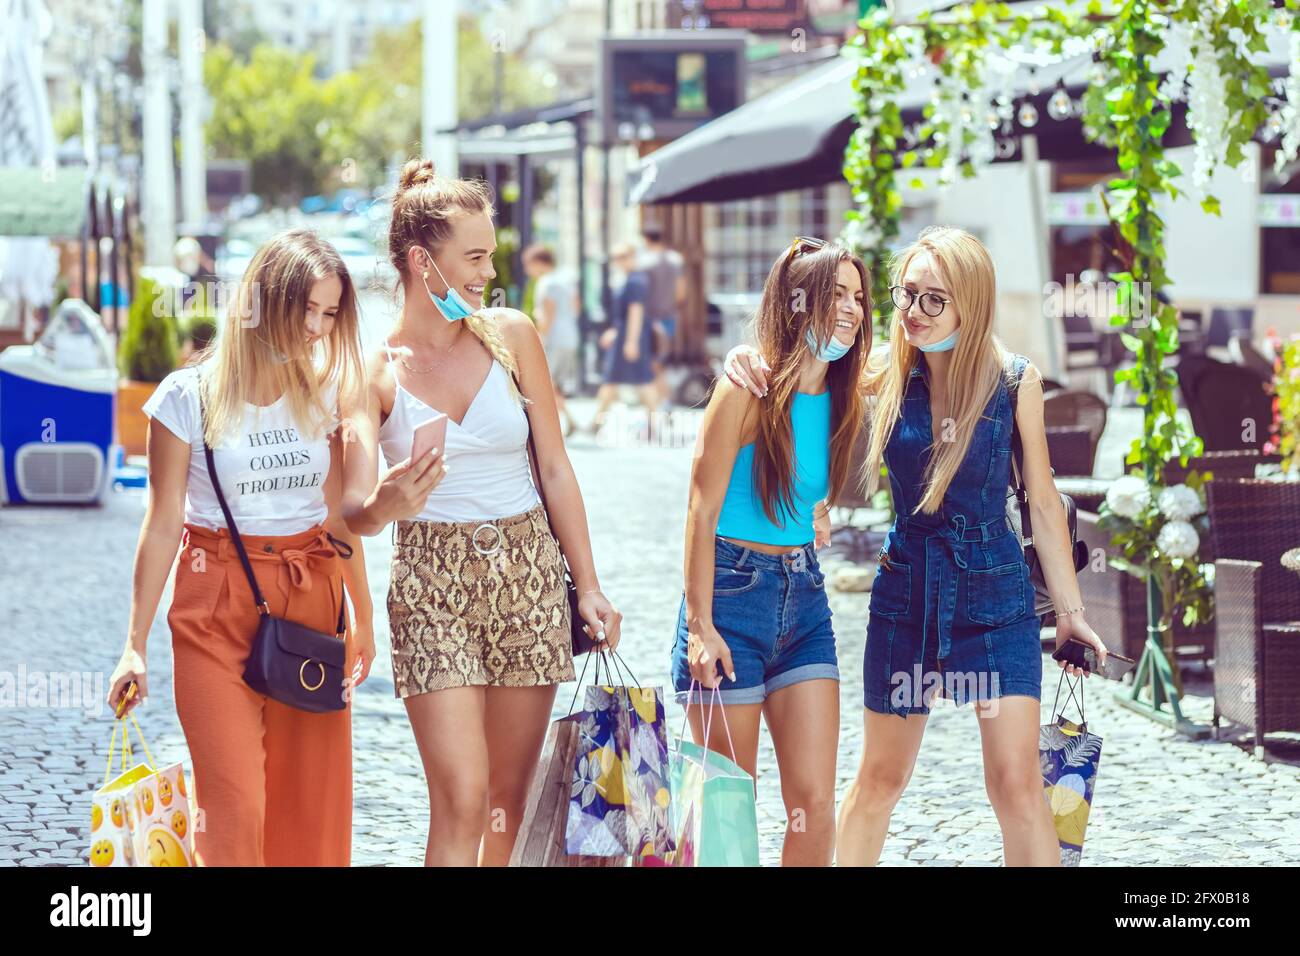 Happy young girls with open face masks having fun enjoying a day together shopping in city street Stock Photo